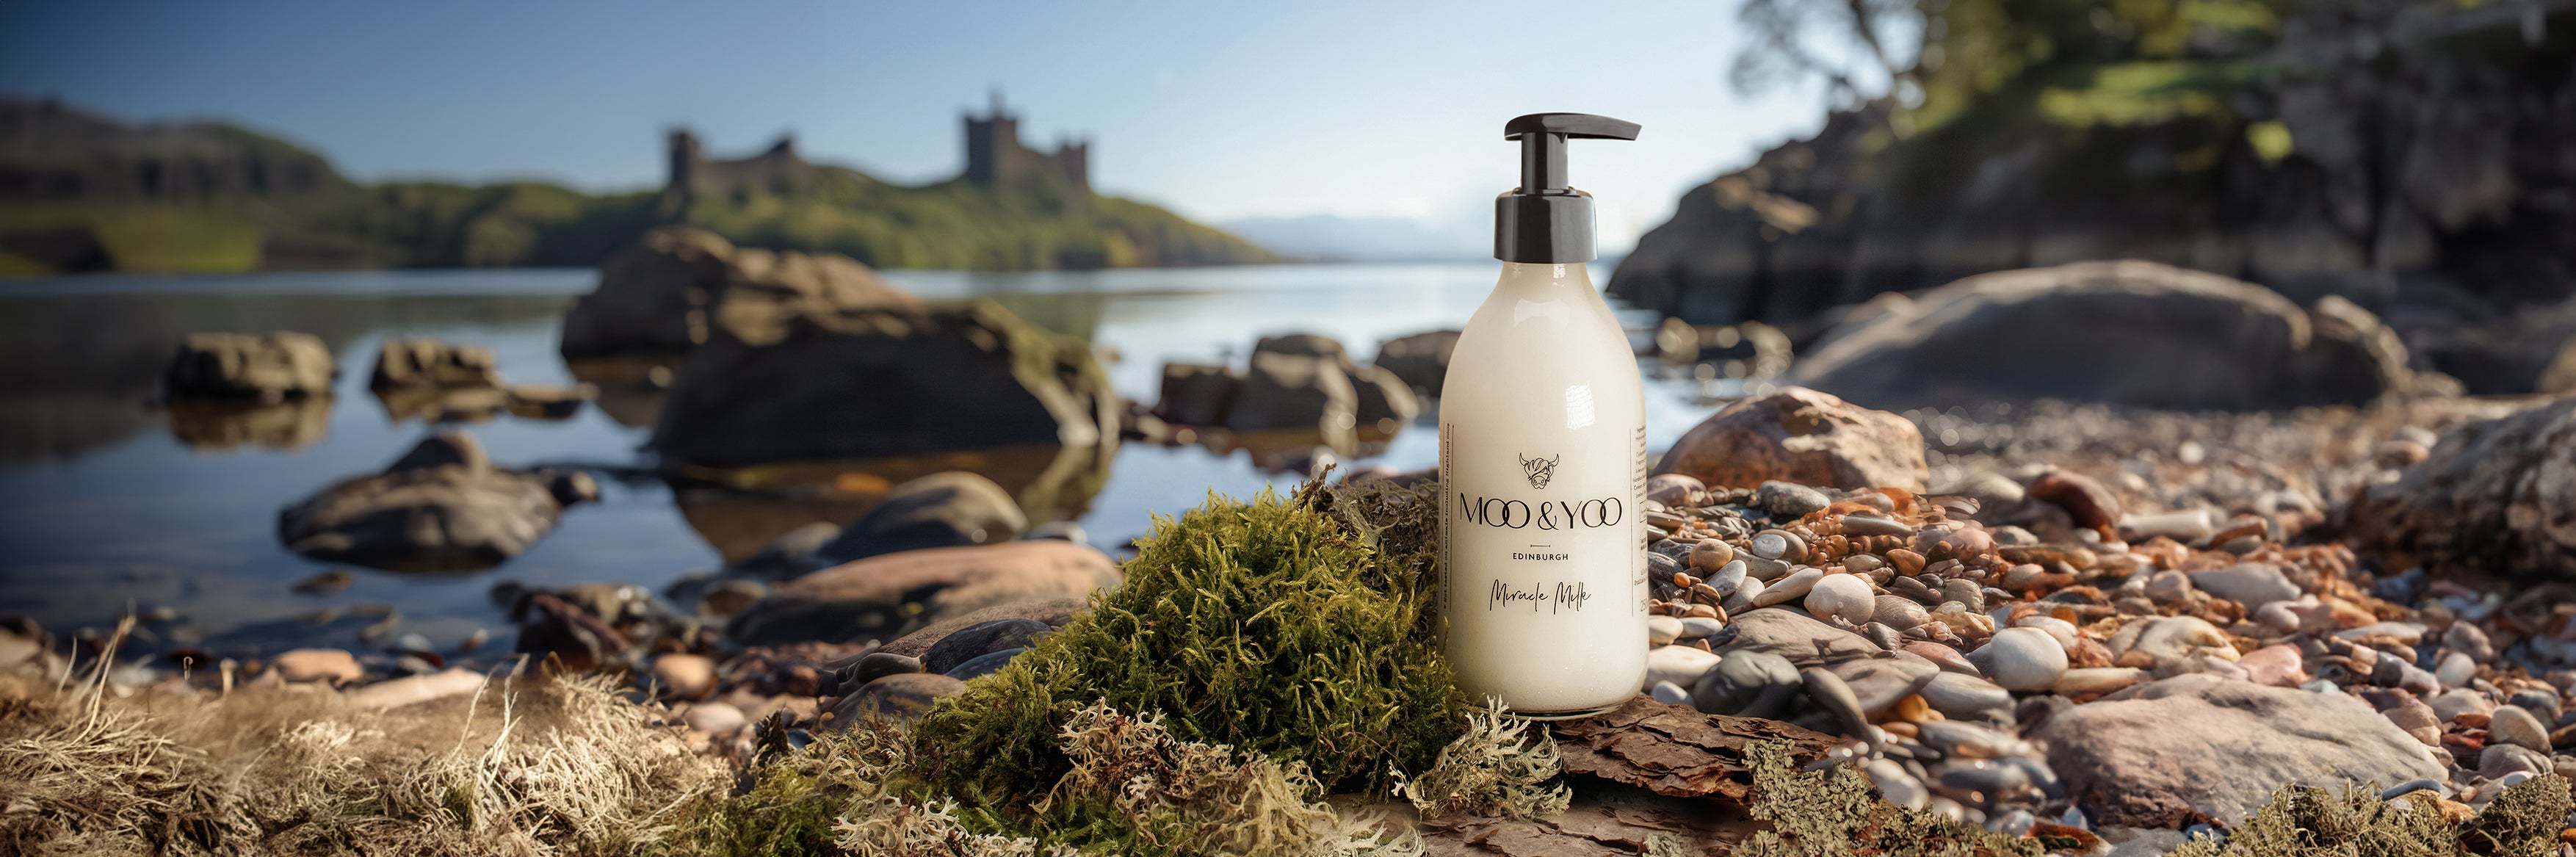 Our miracle milk in a glass bottle on cobblestones in the foreground with a lock and a Scottish castle in the background 